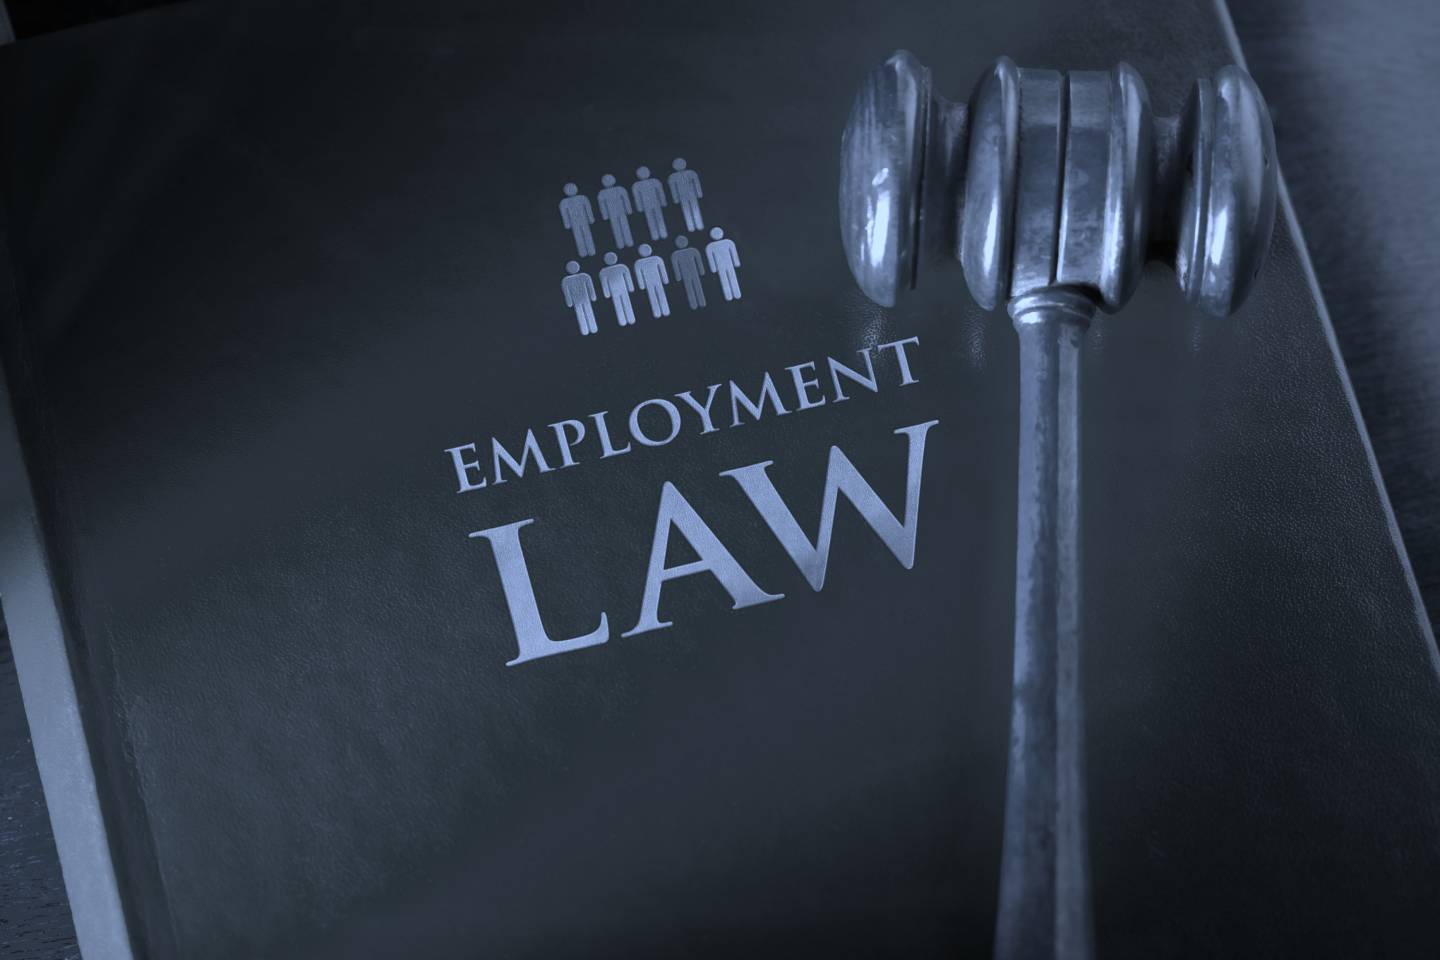 We represent clients through all phases and all types of employment issues ranging from internal investigations and negotiations to litigation in administrative agencies and the court system.